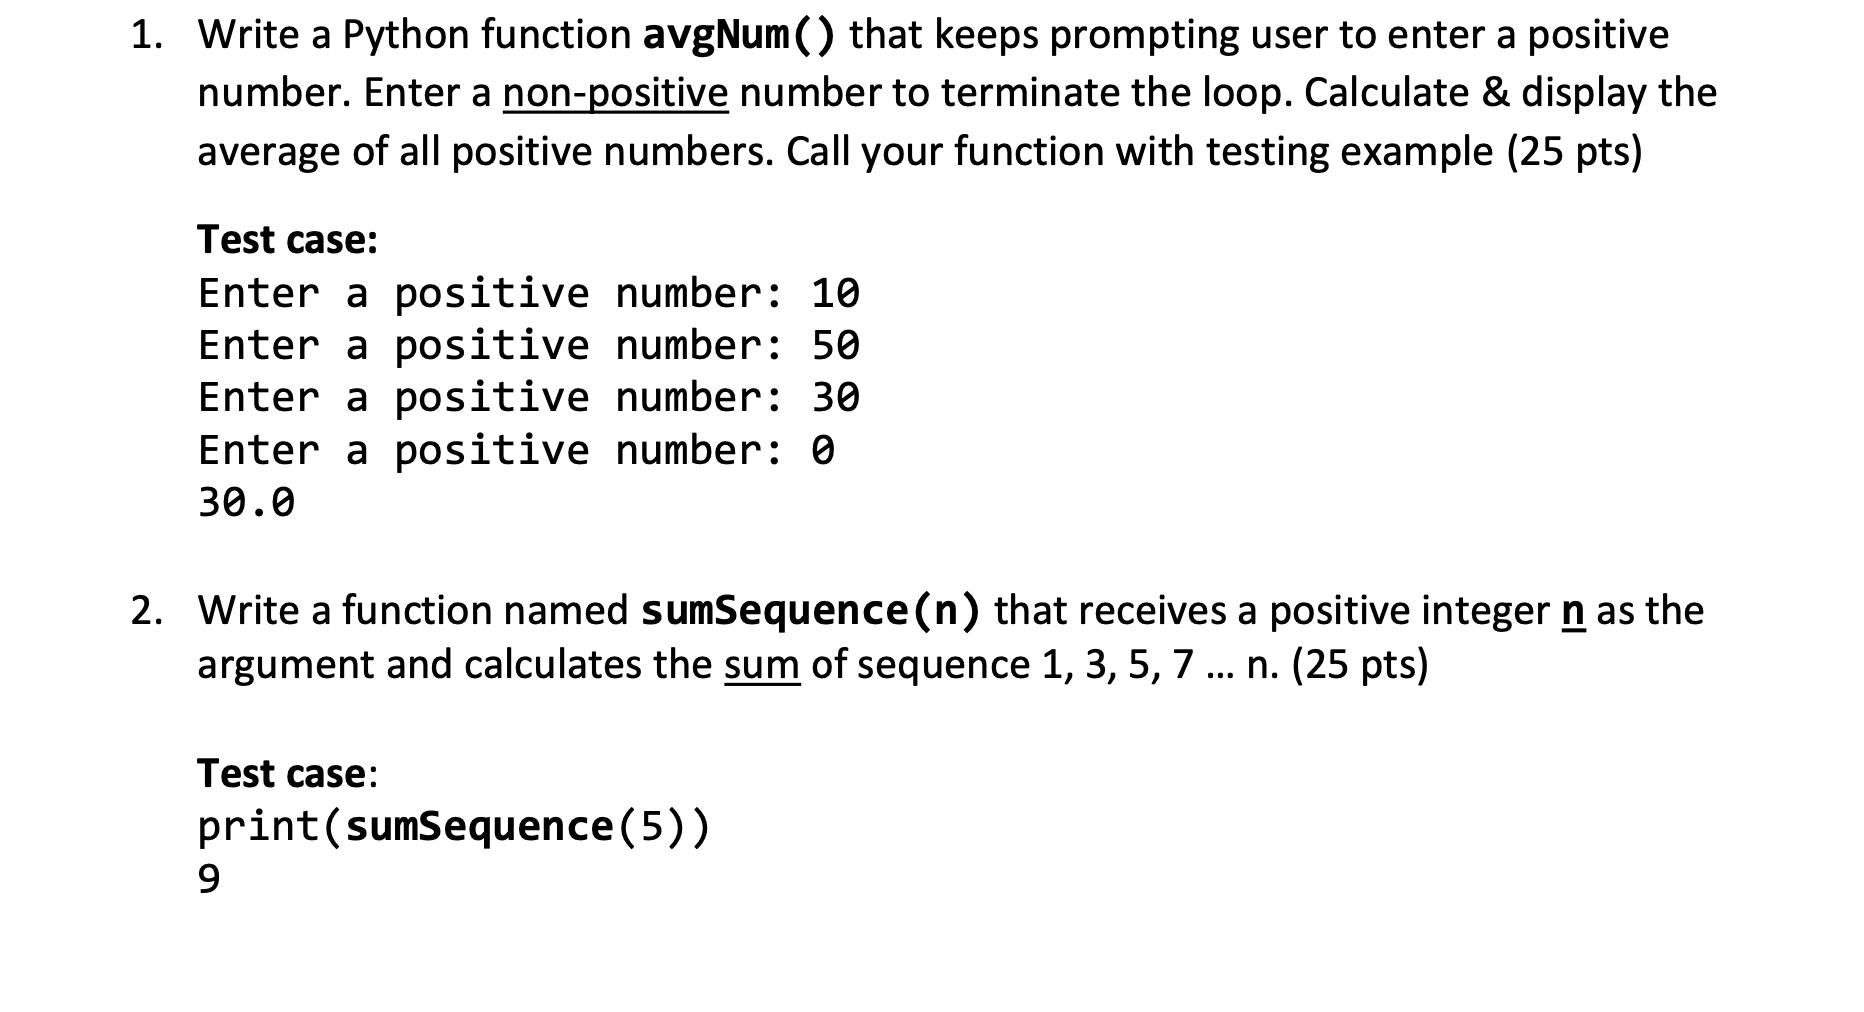 1. Write a Python function avgNum() that keeps prompting user to enter a positive number. Enter a